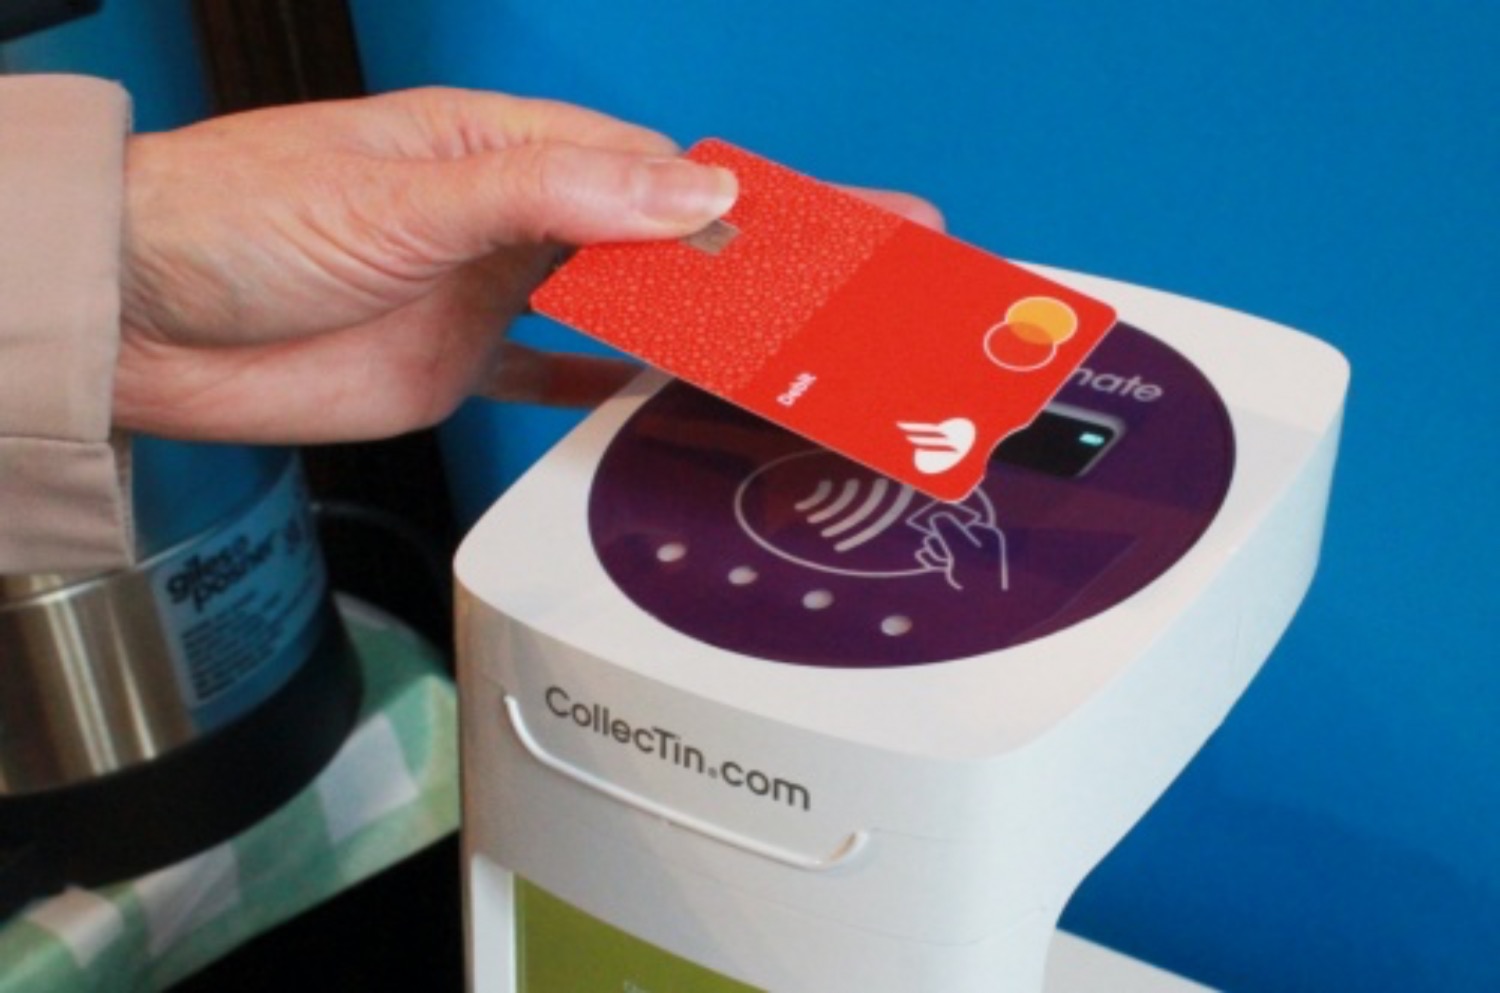 Bank card scanning on a contactless payment system